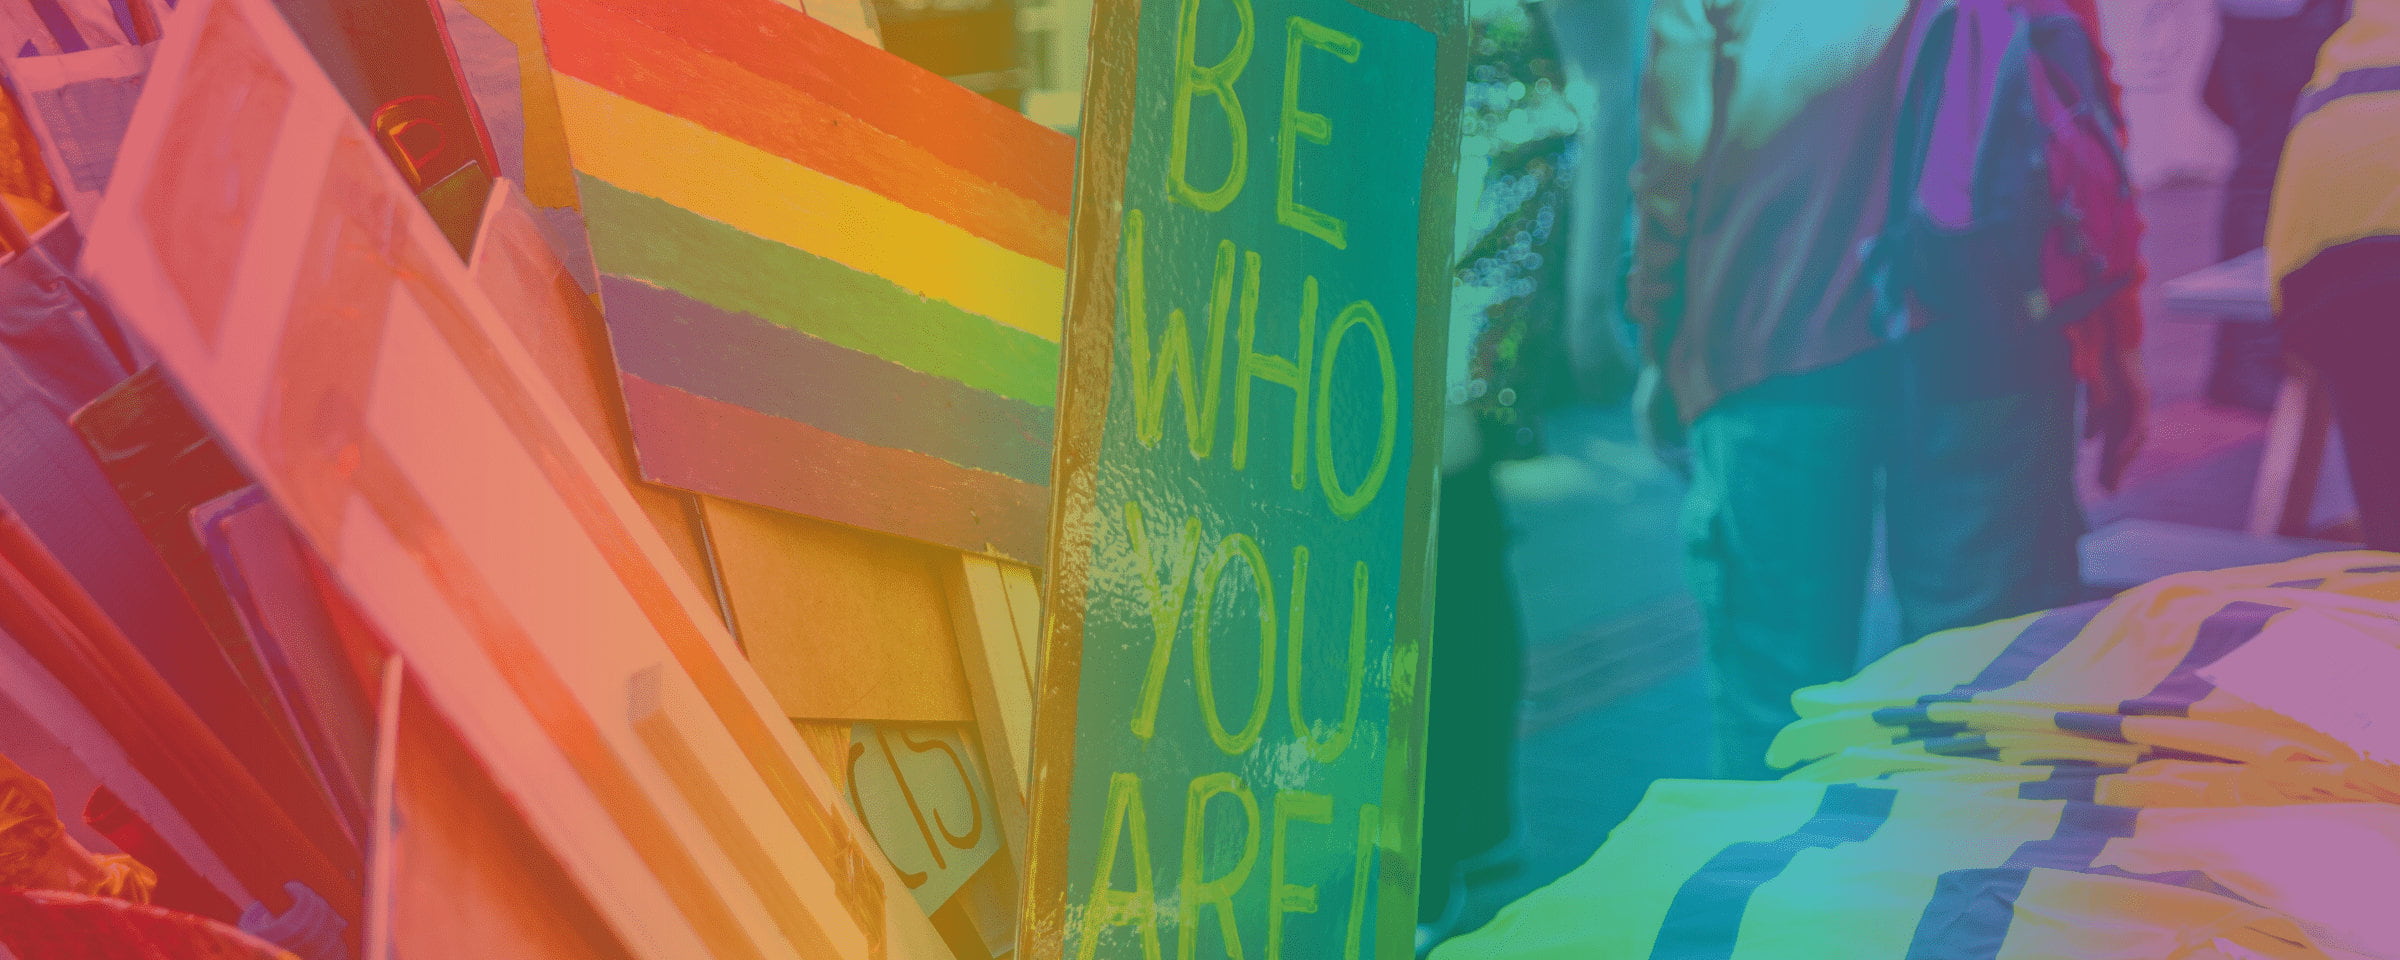 An image with various placards including one with a horizontal rainbow flag and one with text that reads 'BE WHO YOU ARE!